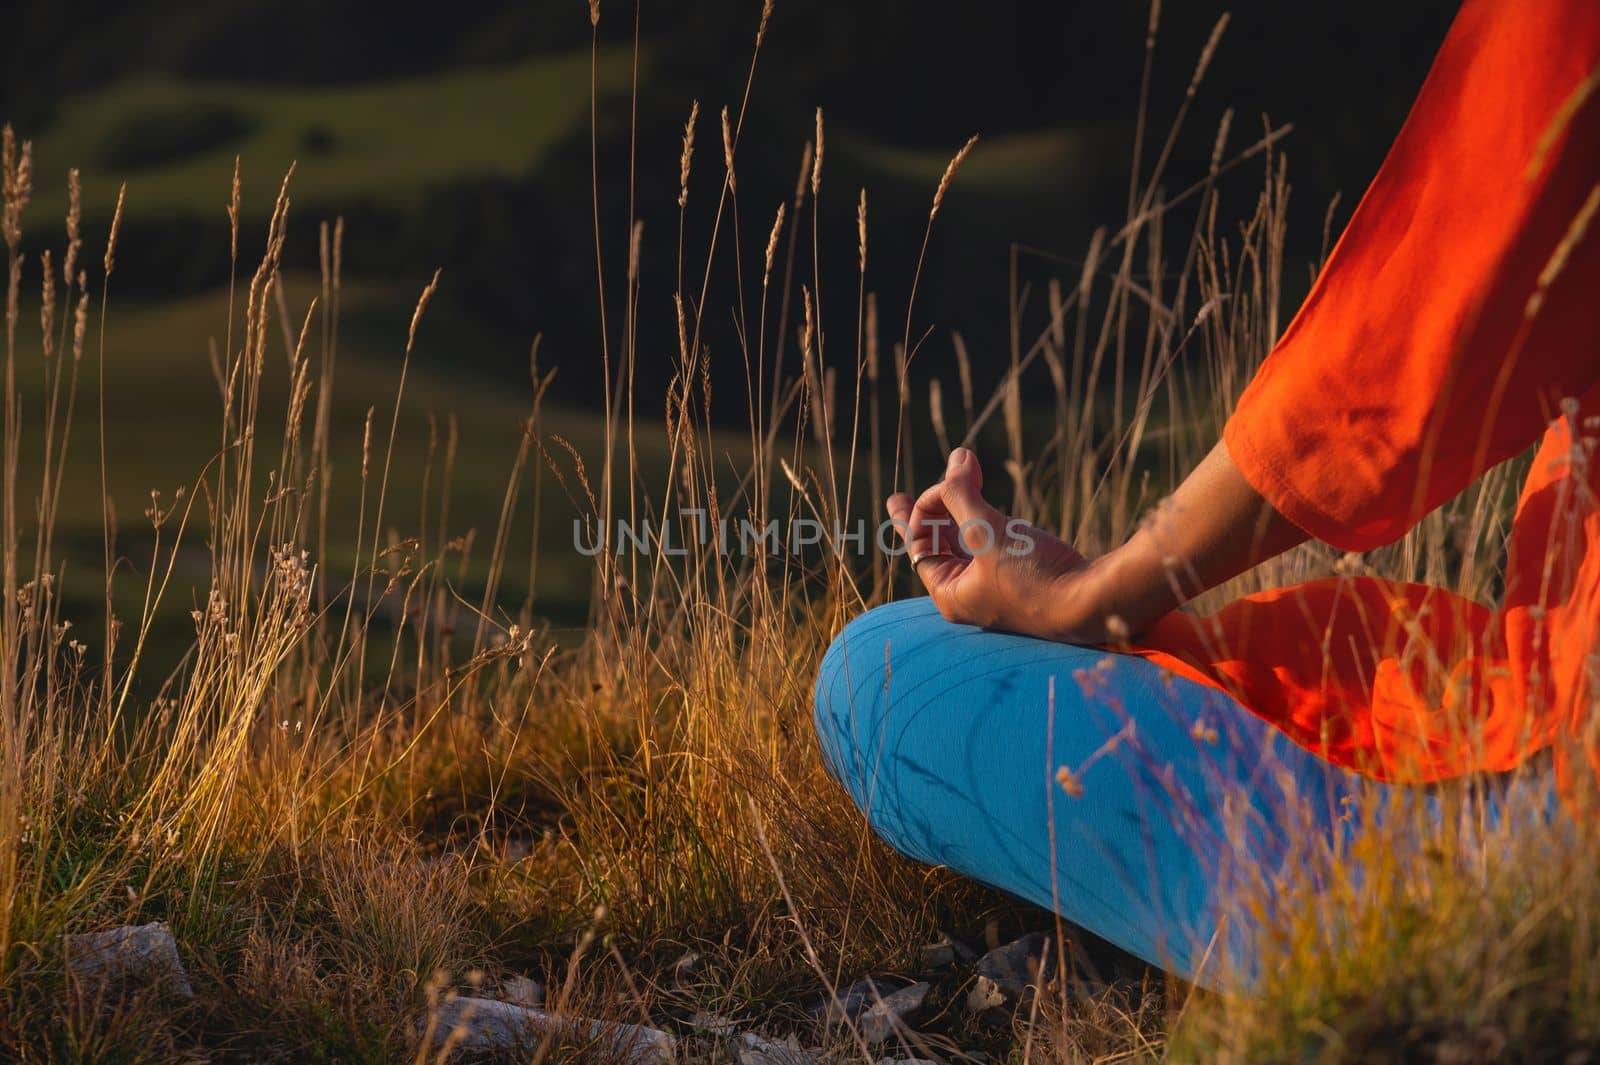 close-up of a woman's hand sitting in a meditation pose and holding mudra with fingers, yoga in the grass.